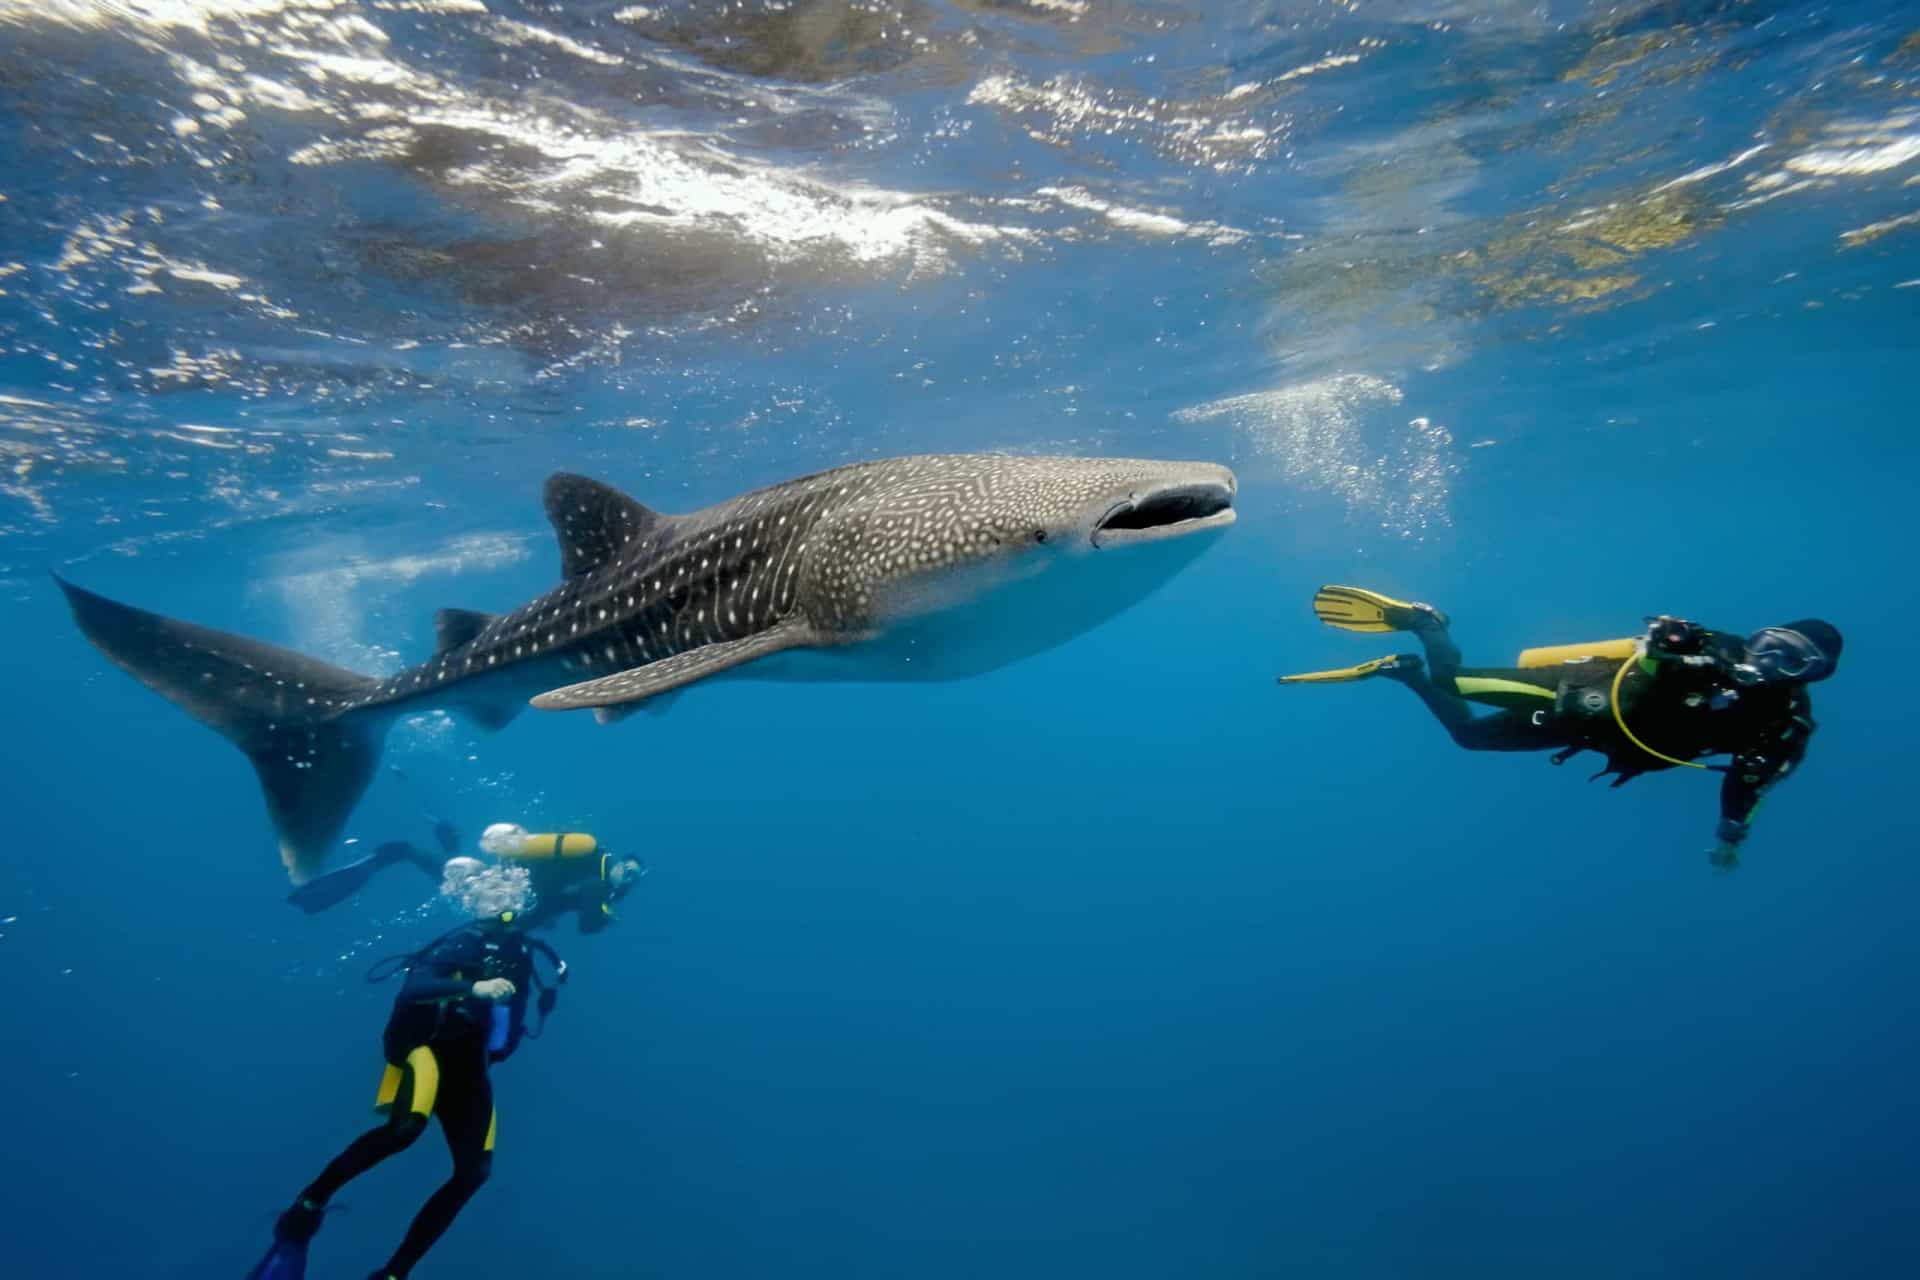 <p>For those underwater enthusiasts, the Maldives provides one of the richest arrays of sea life in the world. The best driving instructors work in the Maldives, where there are some 1,100 different species of fish.</p>